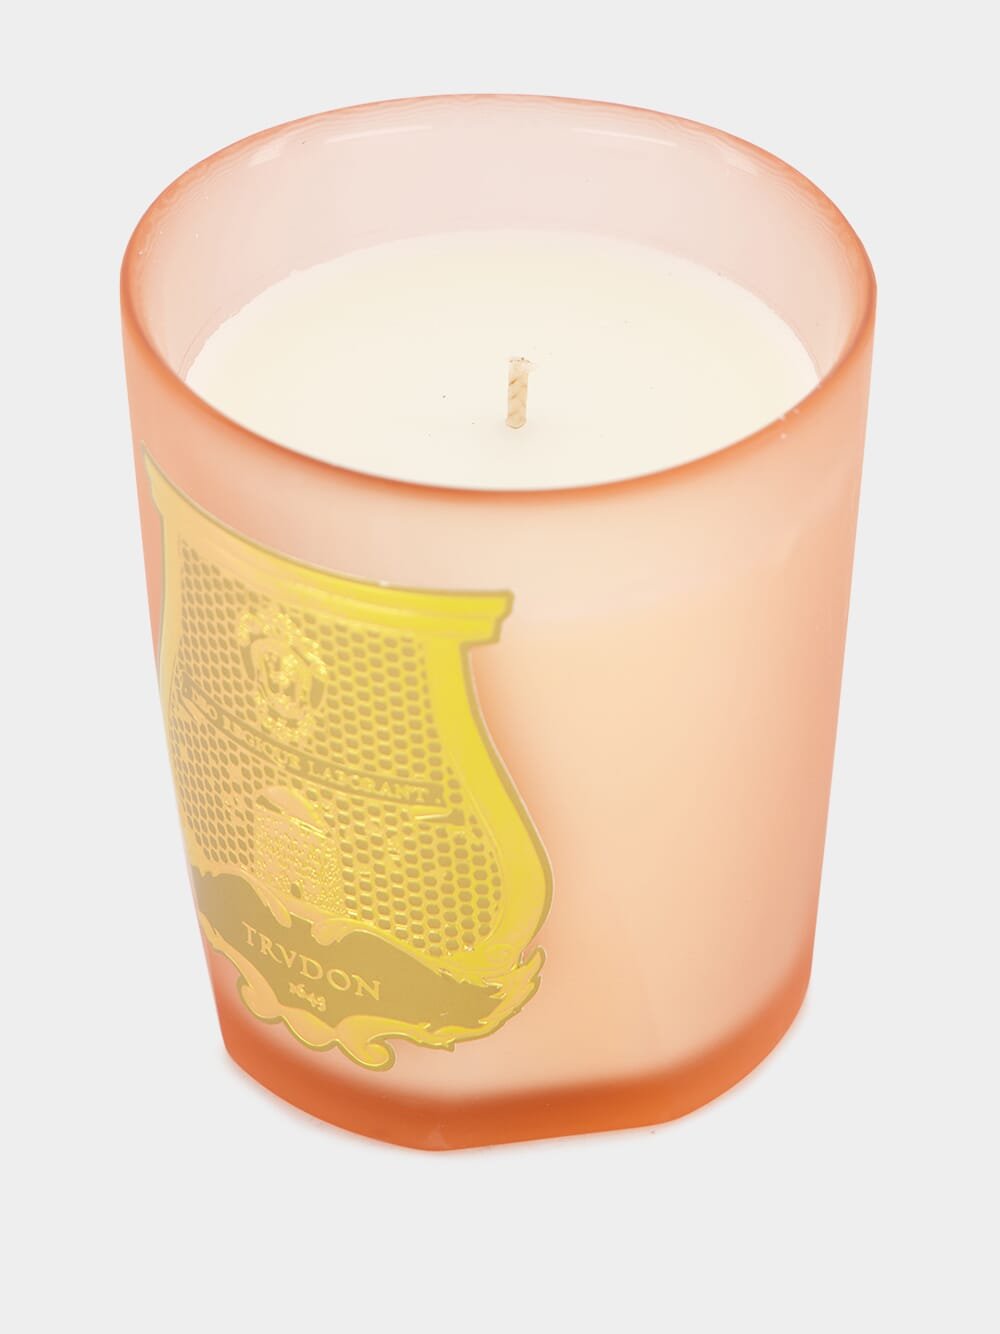 TrudonCandle Tuileries 270g at Fashion Clinic